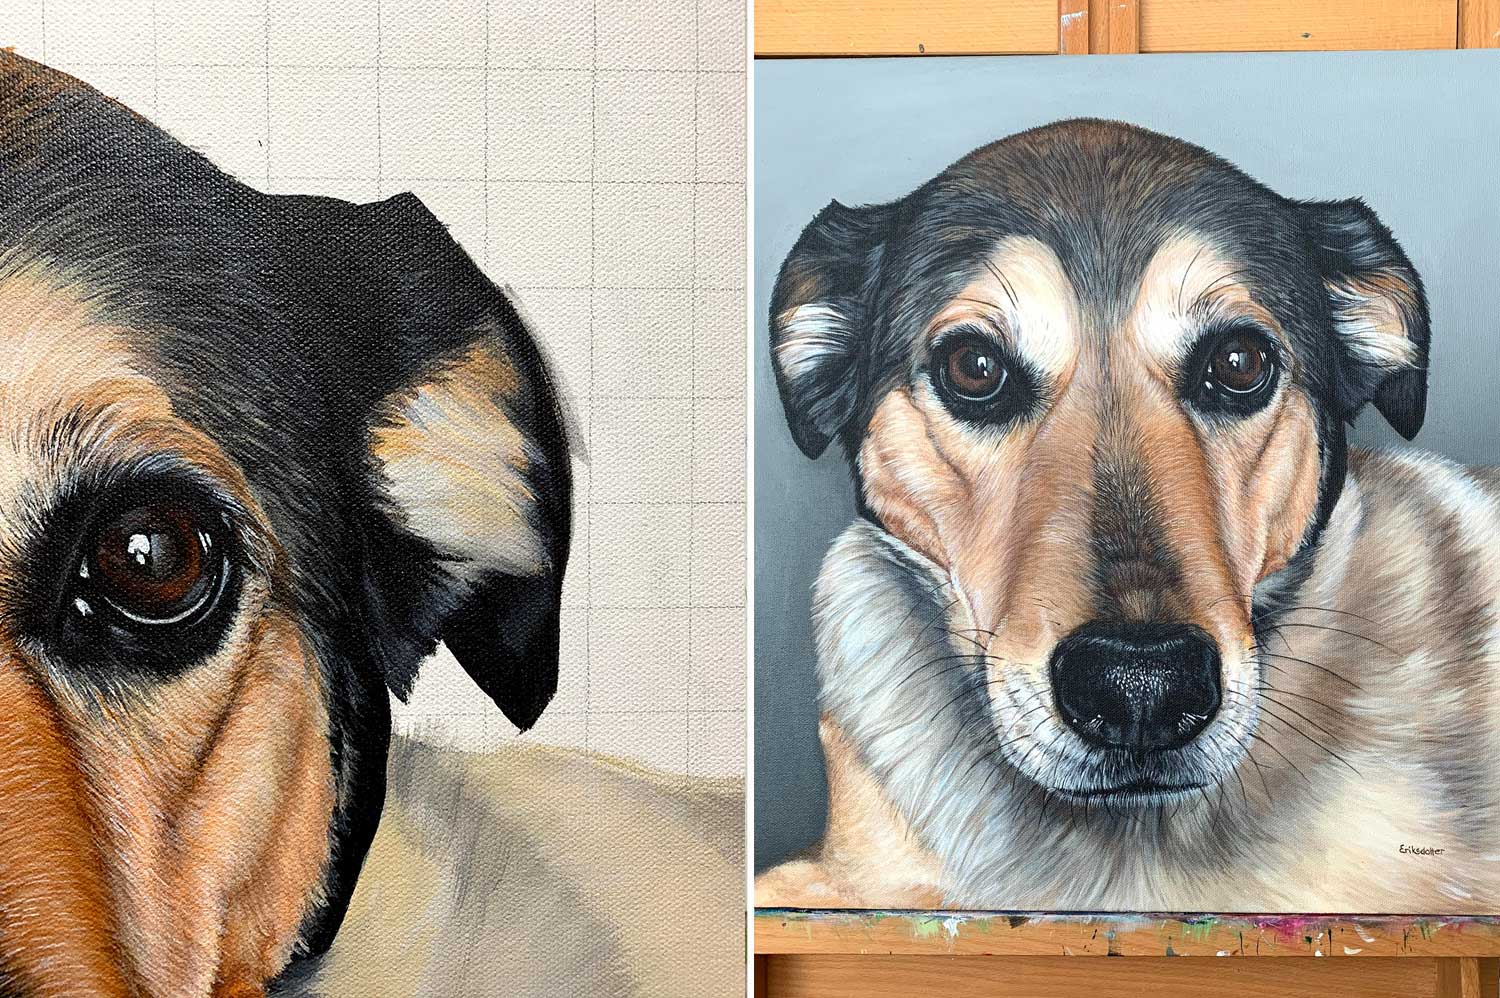 how to draw a realistic dog face